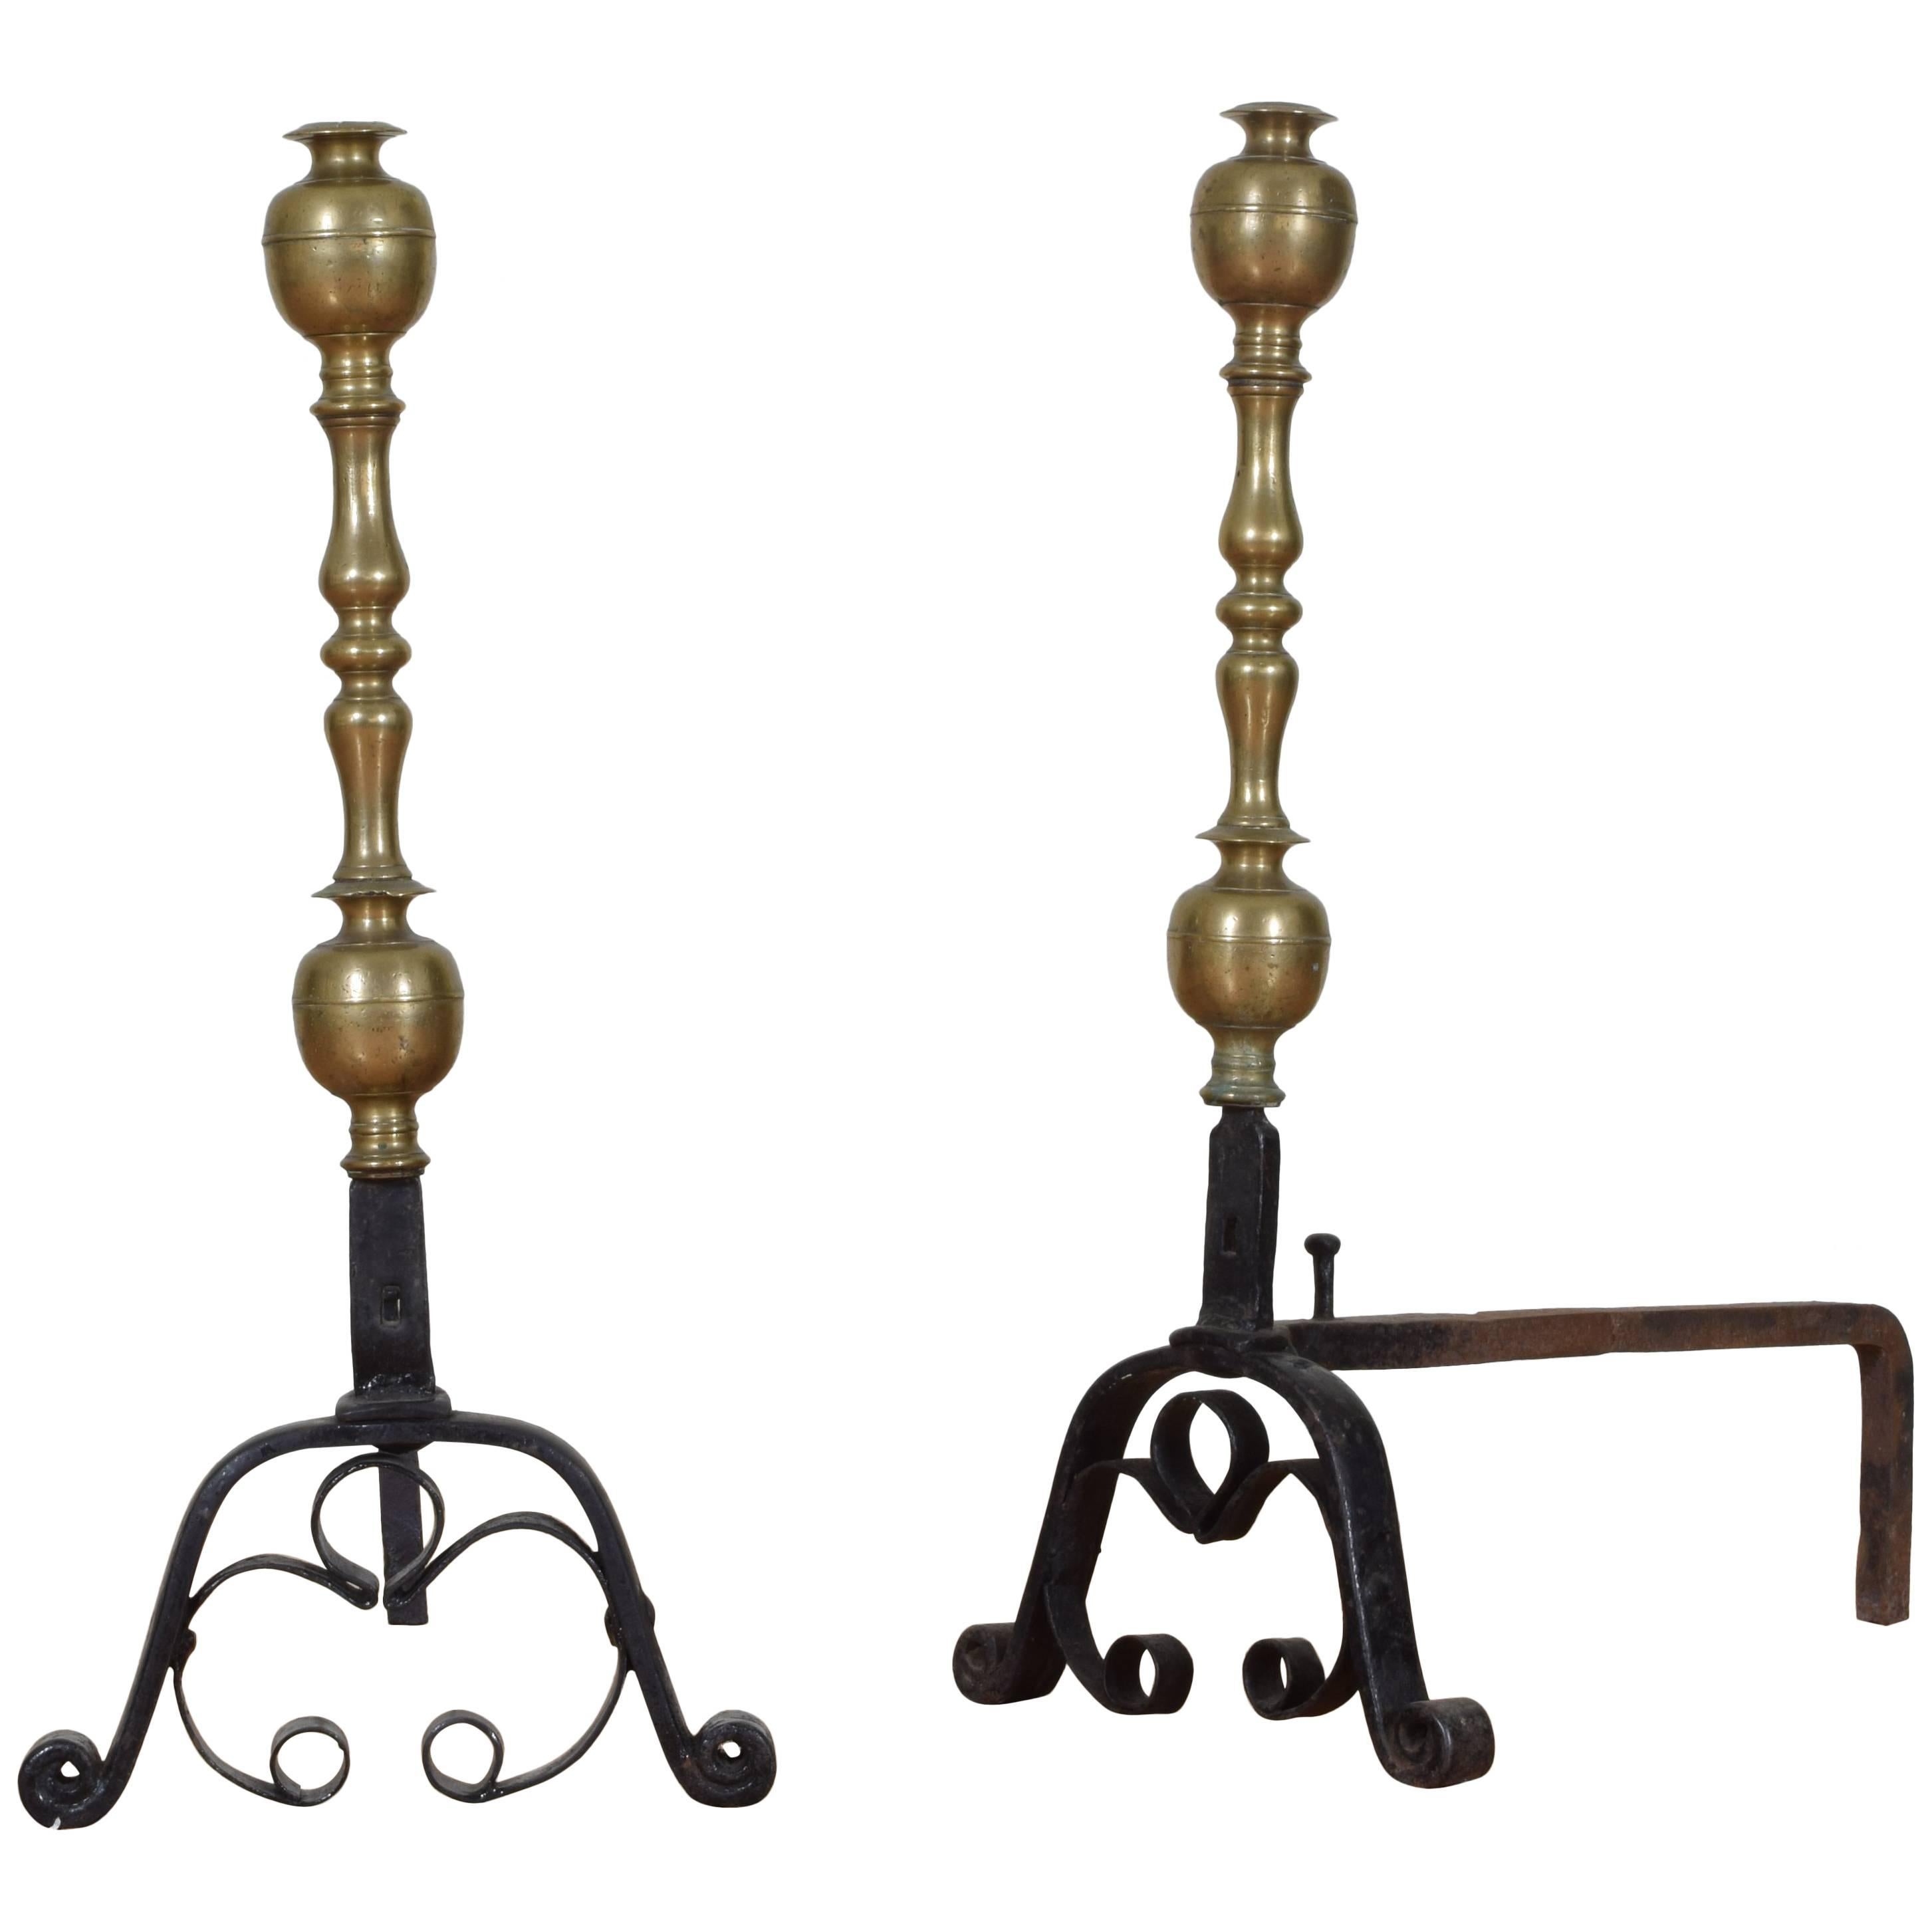 Pair of French Wrought Iron Turned Brass Andirons from the Early 18th Century